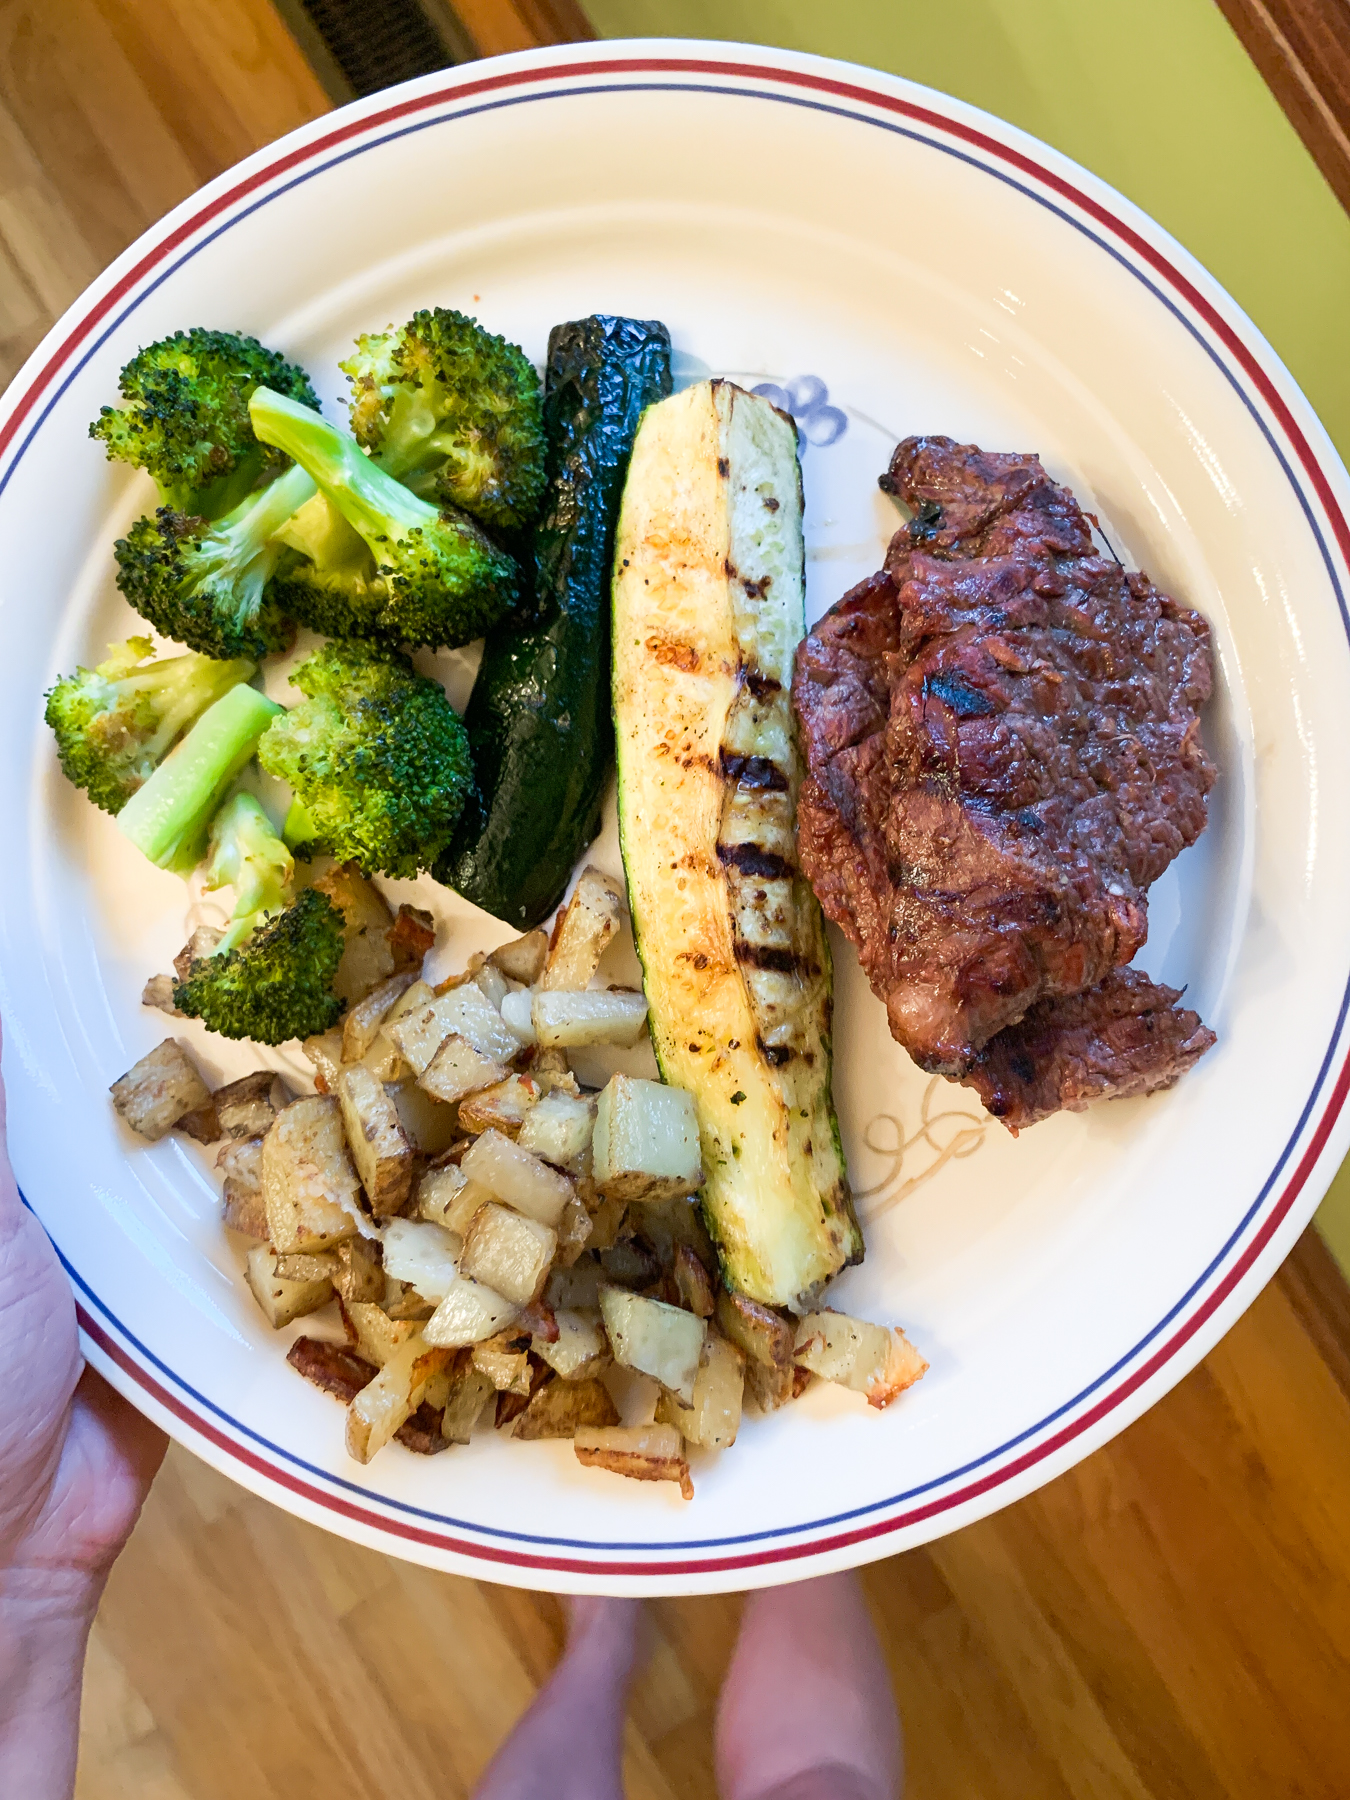 grilled steak with zucchini, roasted broccoli, and potatoes